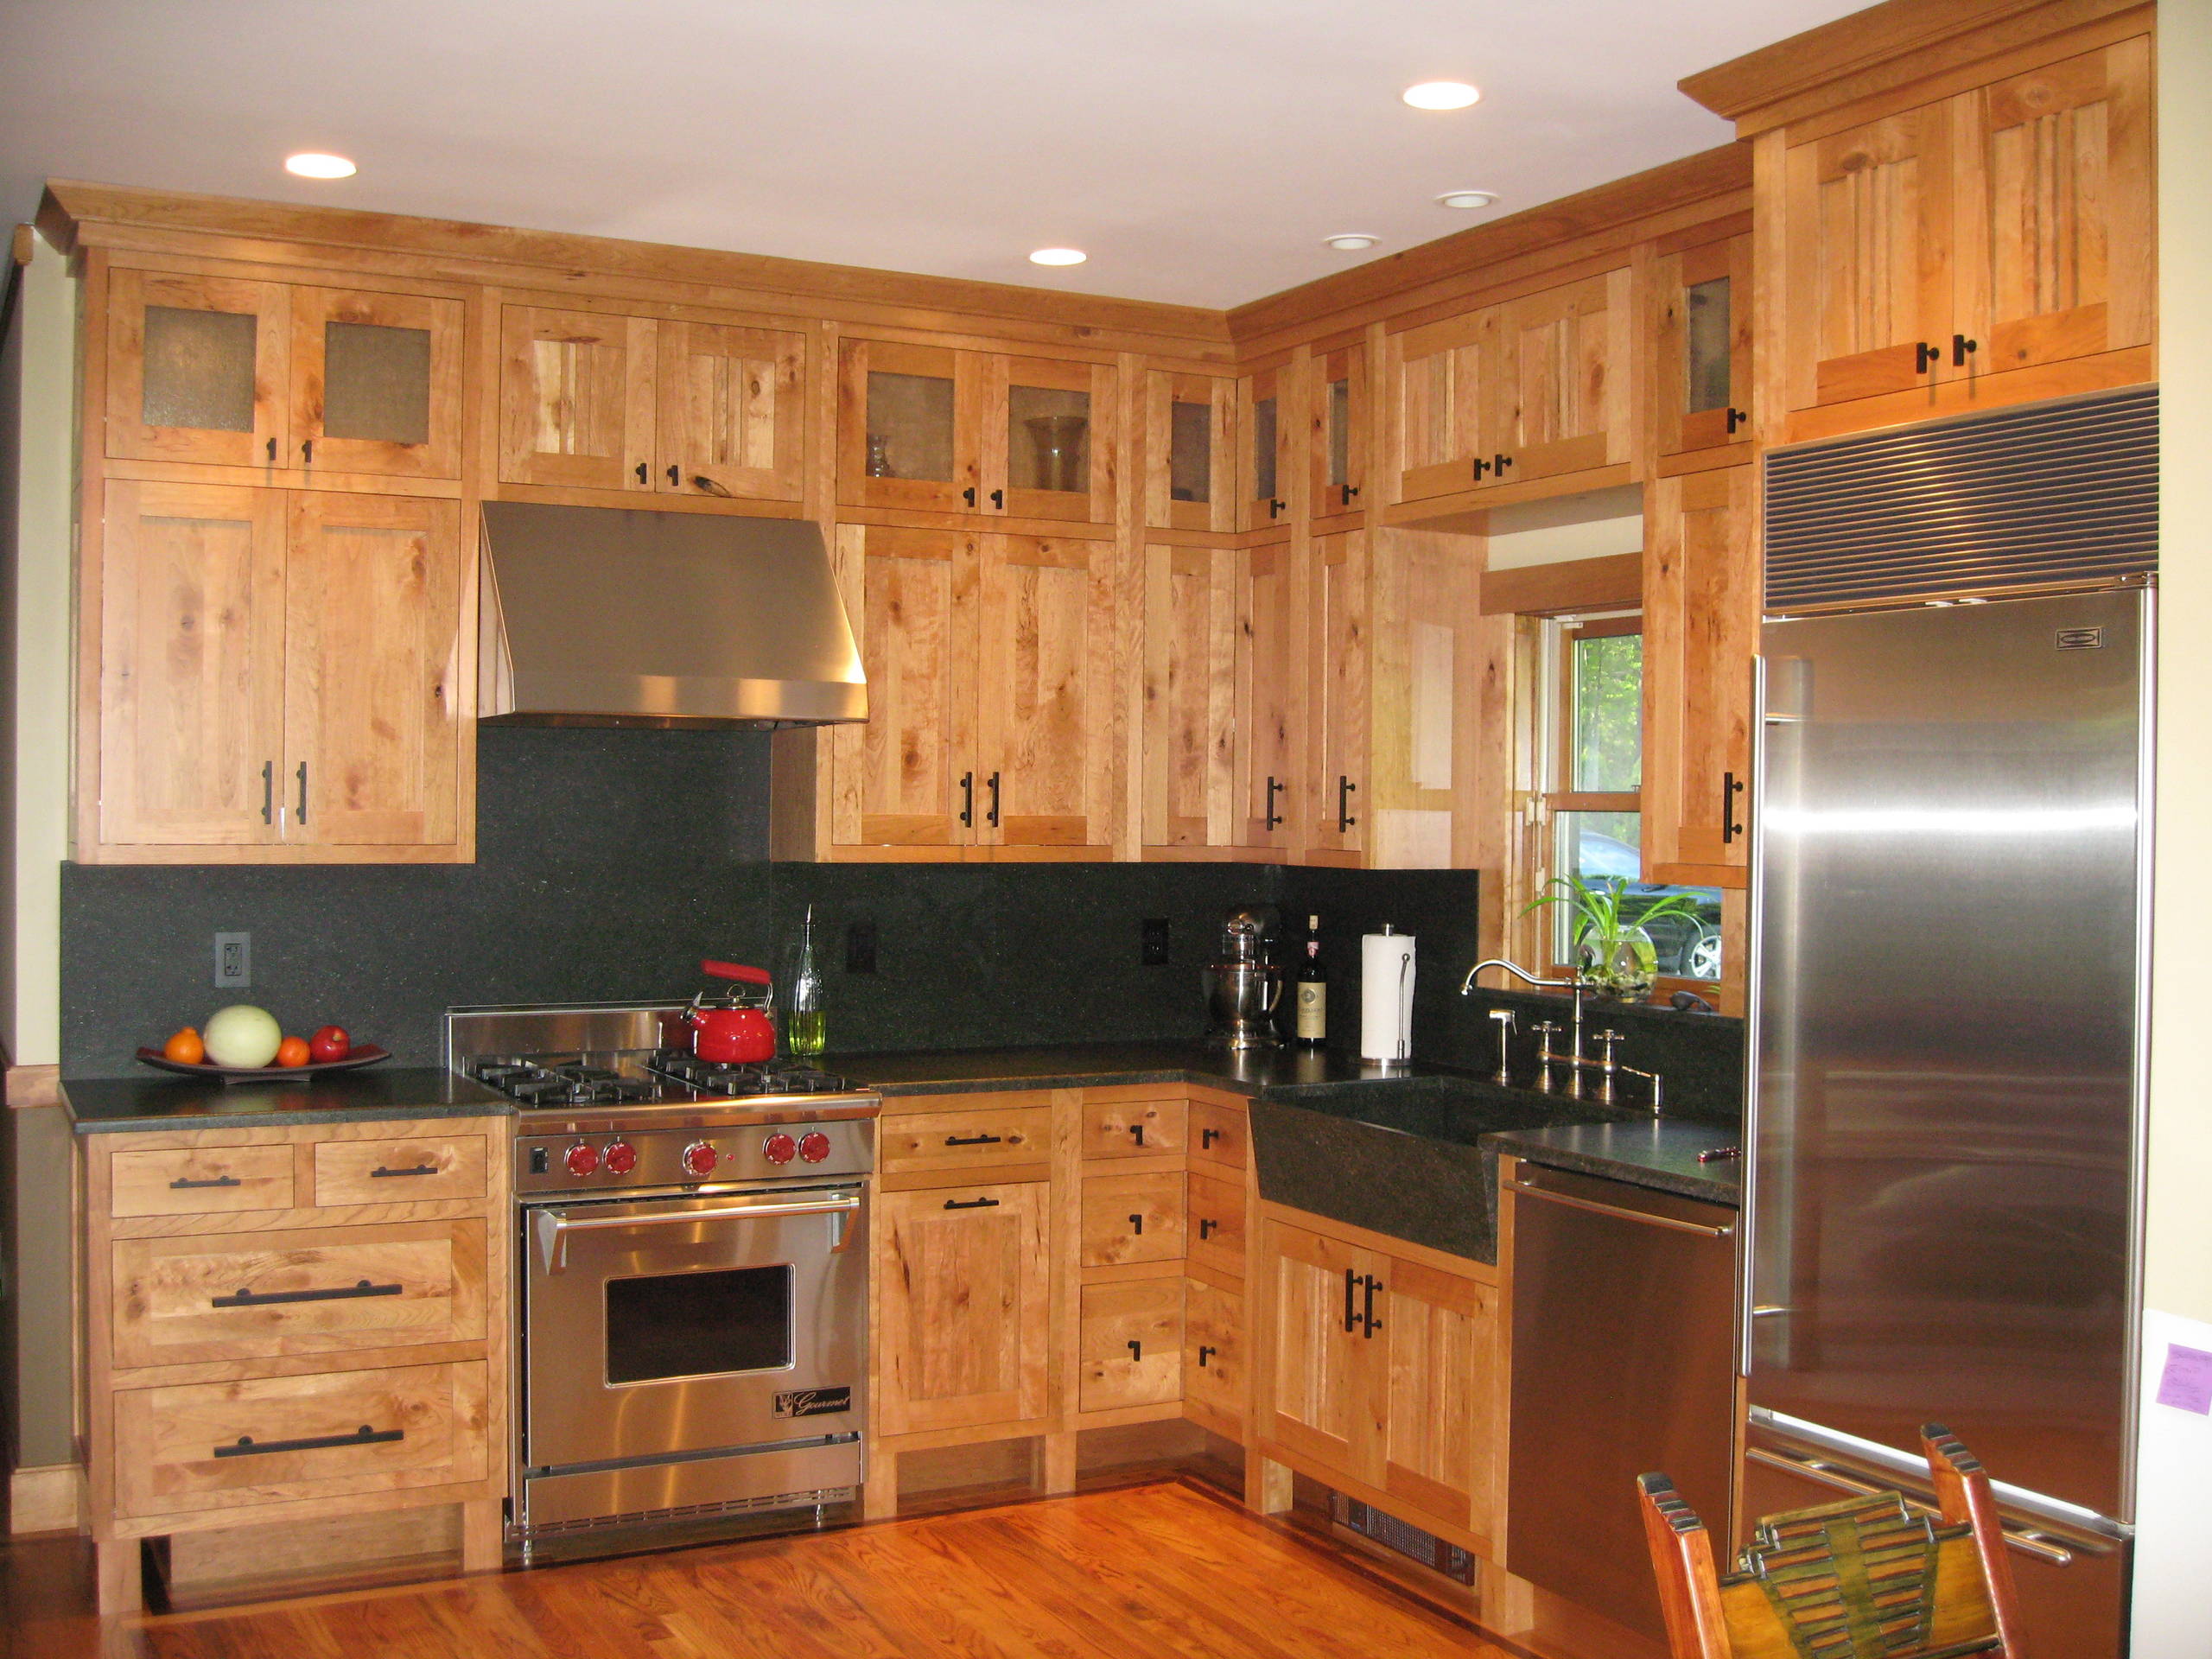 Rustic Cherry Cabinets Houzz, Log Cabin Kitchen Cabinets In Natural Cherry